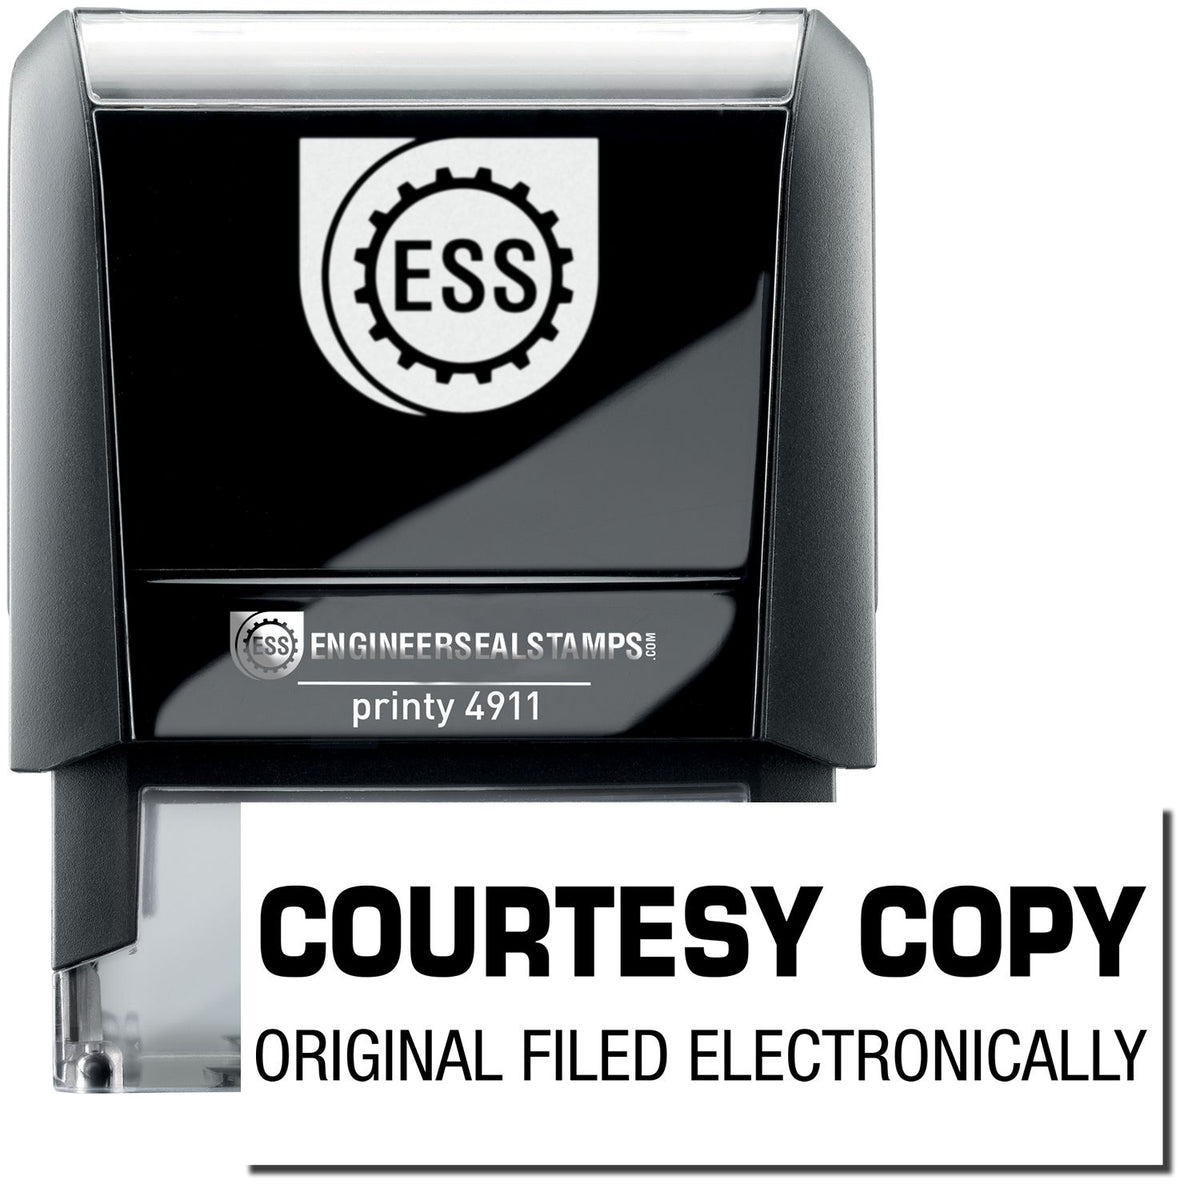 A self-inking stamp with a stamped image showing how the text &quot;COURTESY COPY&quot; in a bold font and under it, the text &quot;ORIGINAL FILED ELECTRONICALLY&quot; in a small narrow font is displayed after stamping.